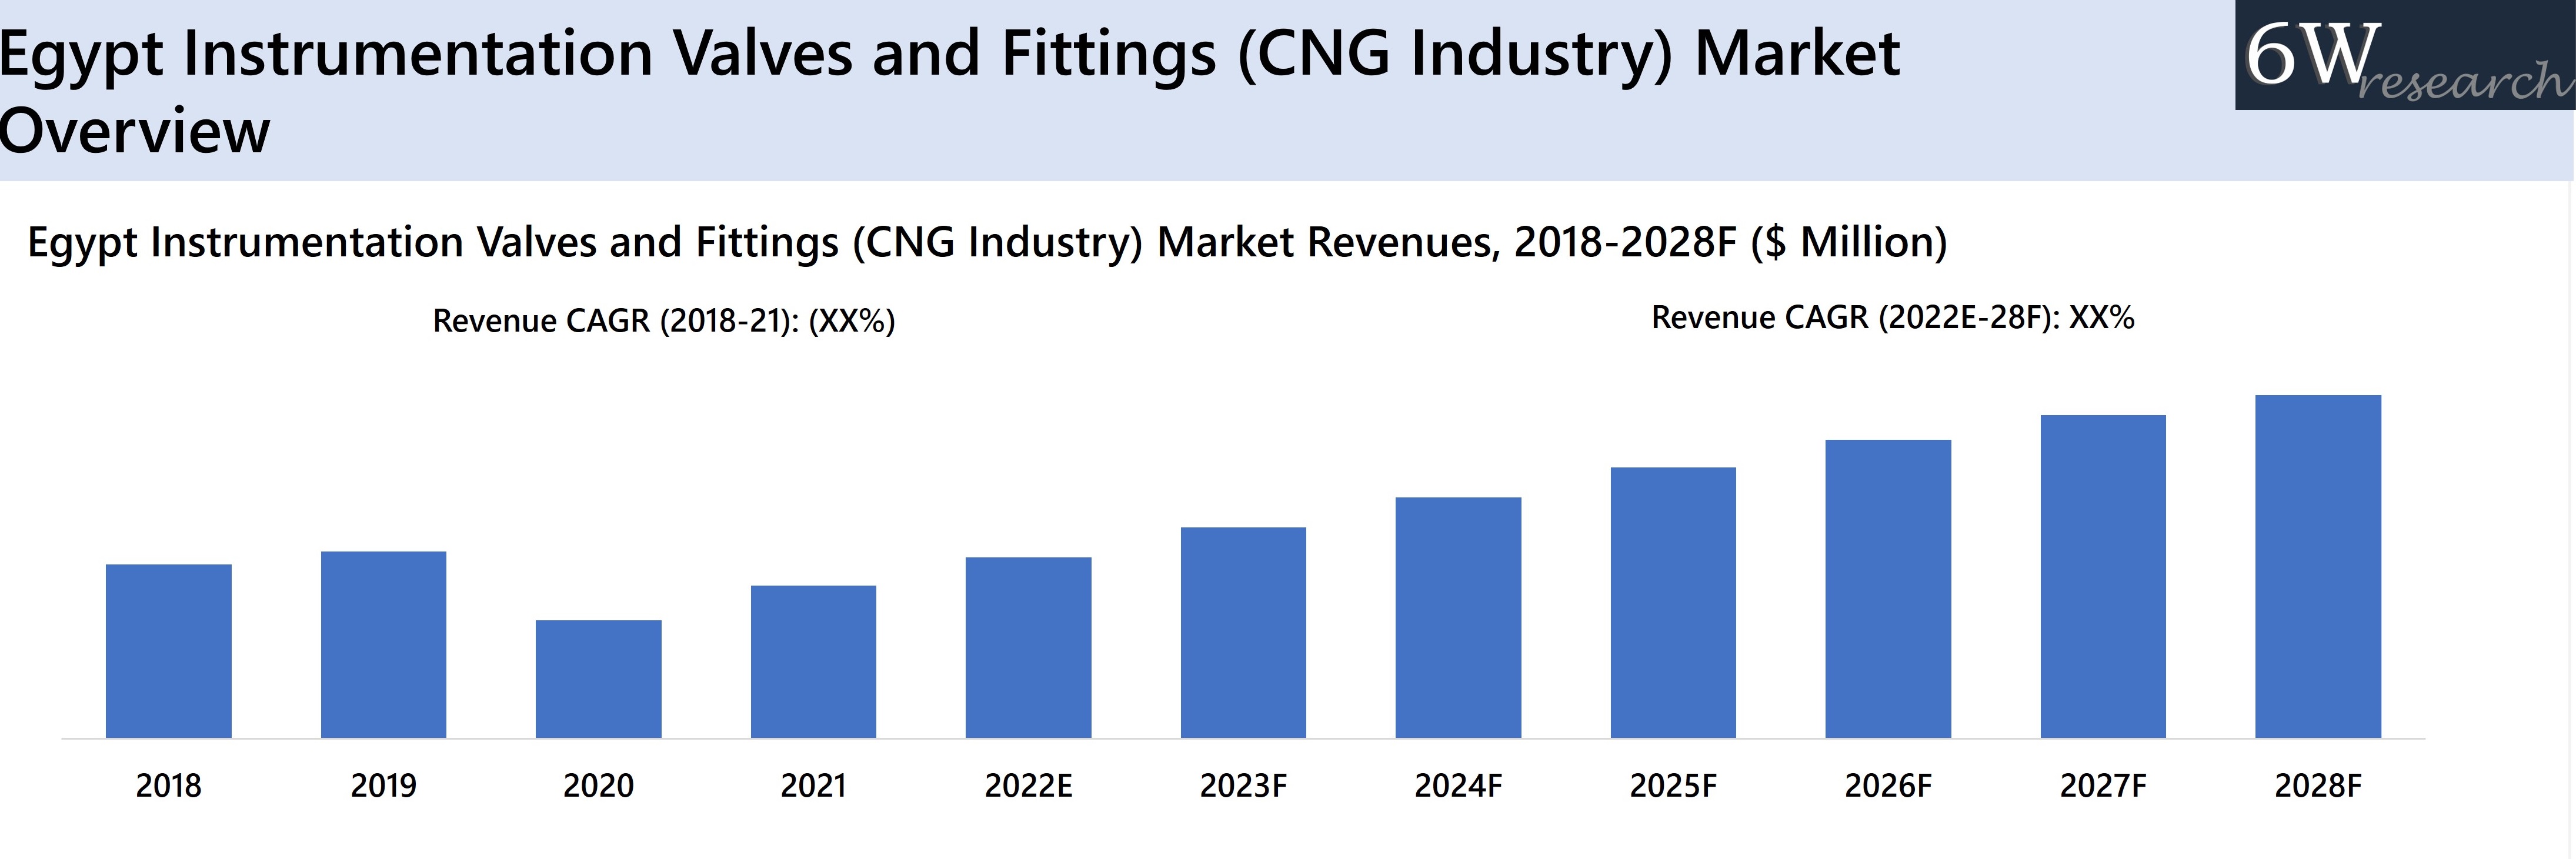 Egypt Instrumentation Valves and Fittings (CNG Industry) Market Overview